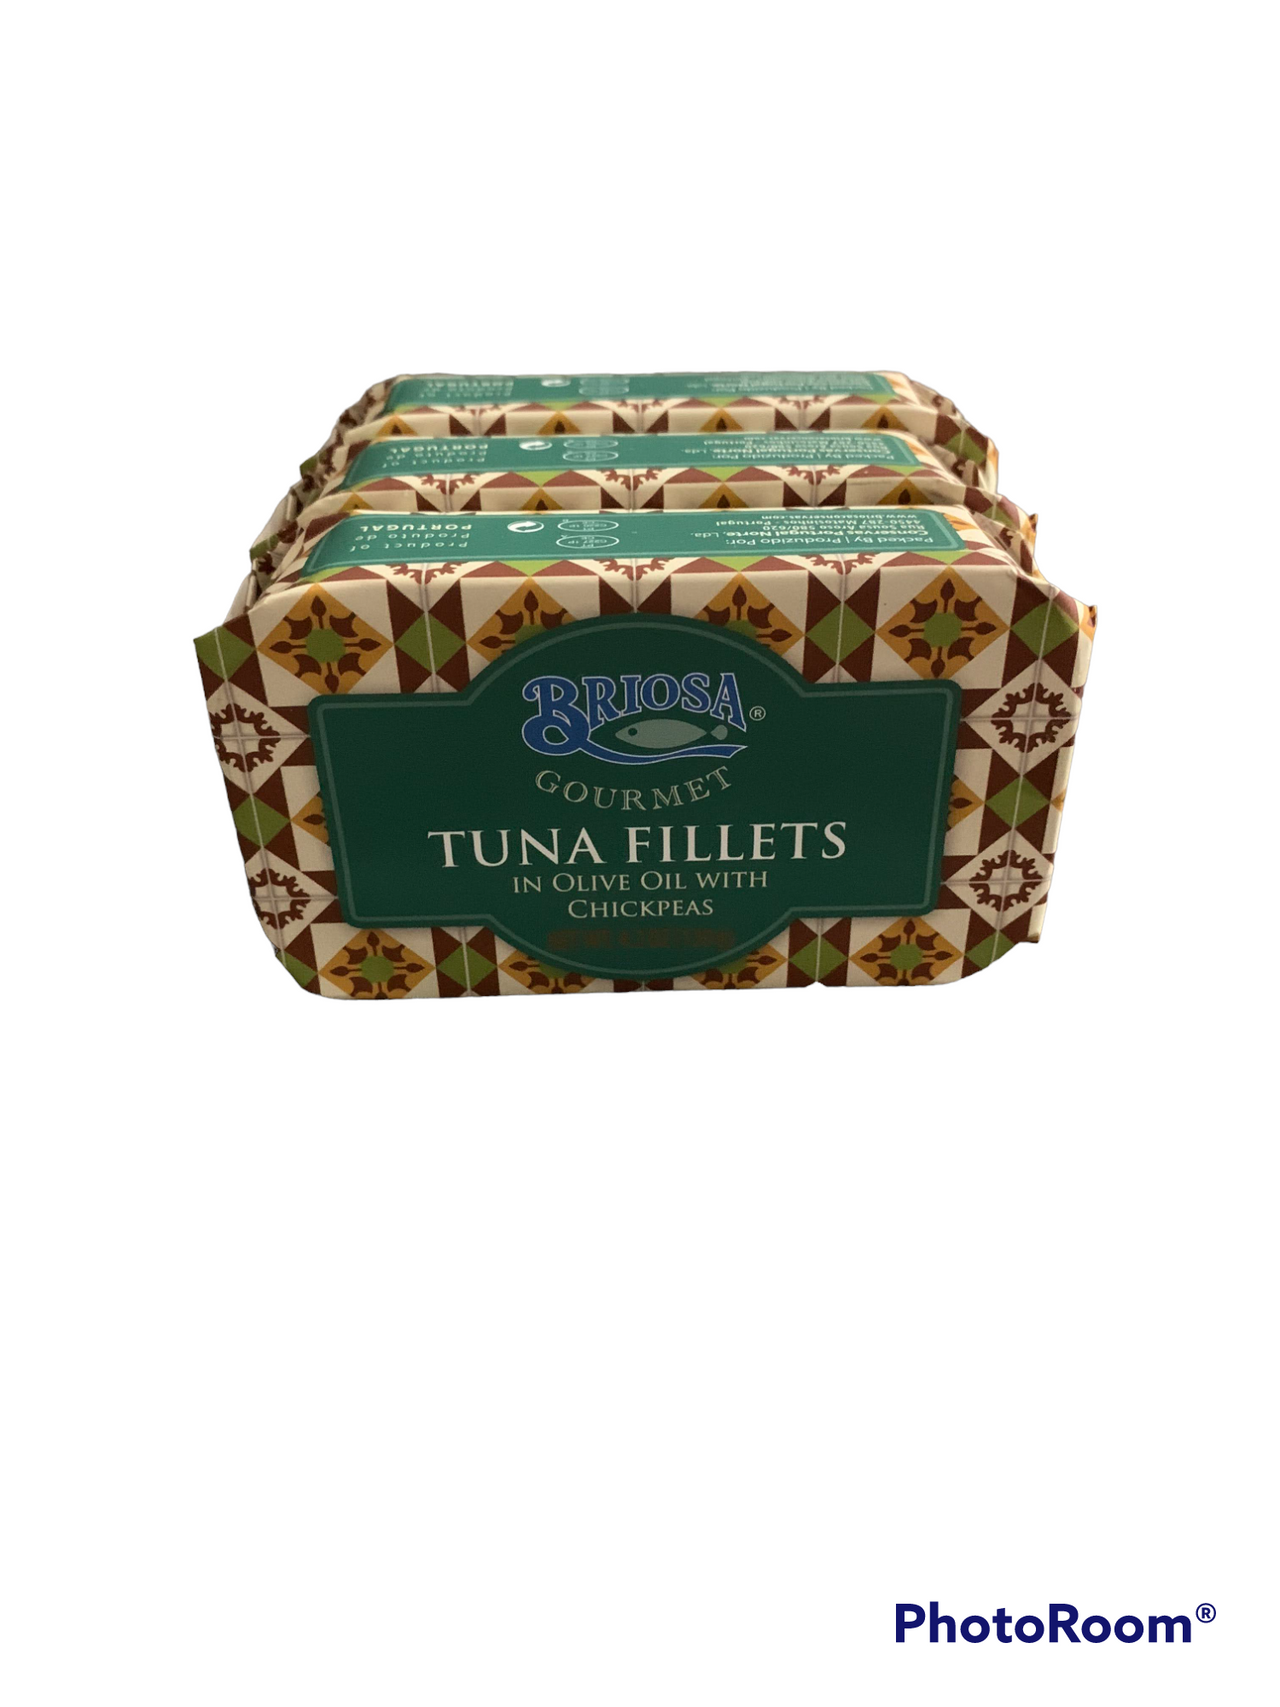 Briosa Gourmet Tuna Fillets in Olive Oil with Chickpeas - 3 Pack - TinCanFish